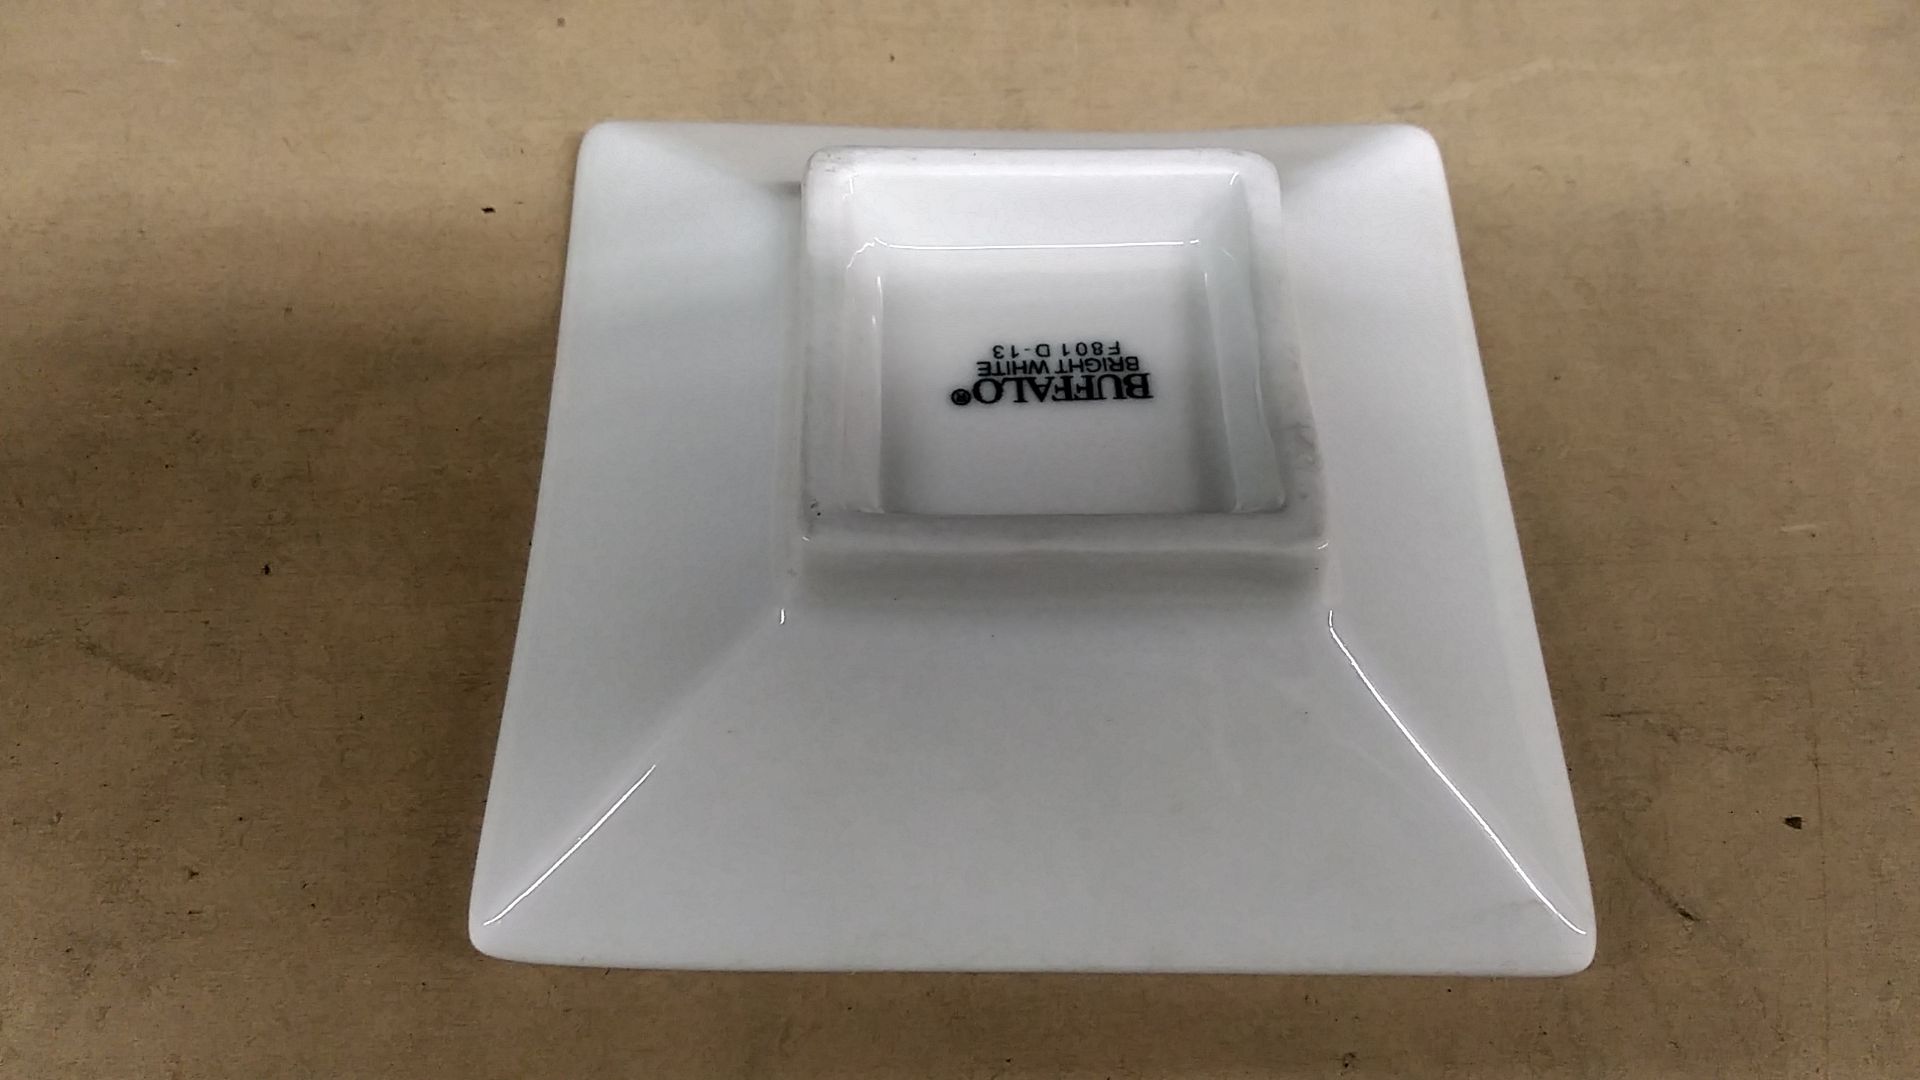 4.5" SQUARE DISHES BY BUFFALO BRIGHT WHITE COLOR (INCLUDES QTY 20) - Image 2 of 3